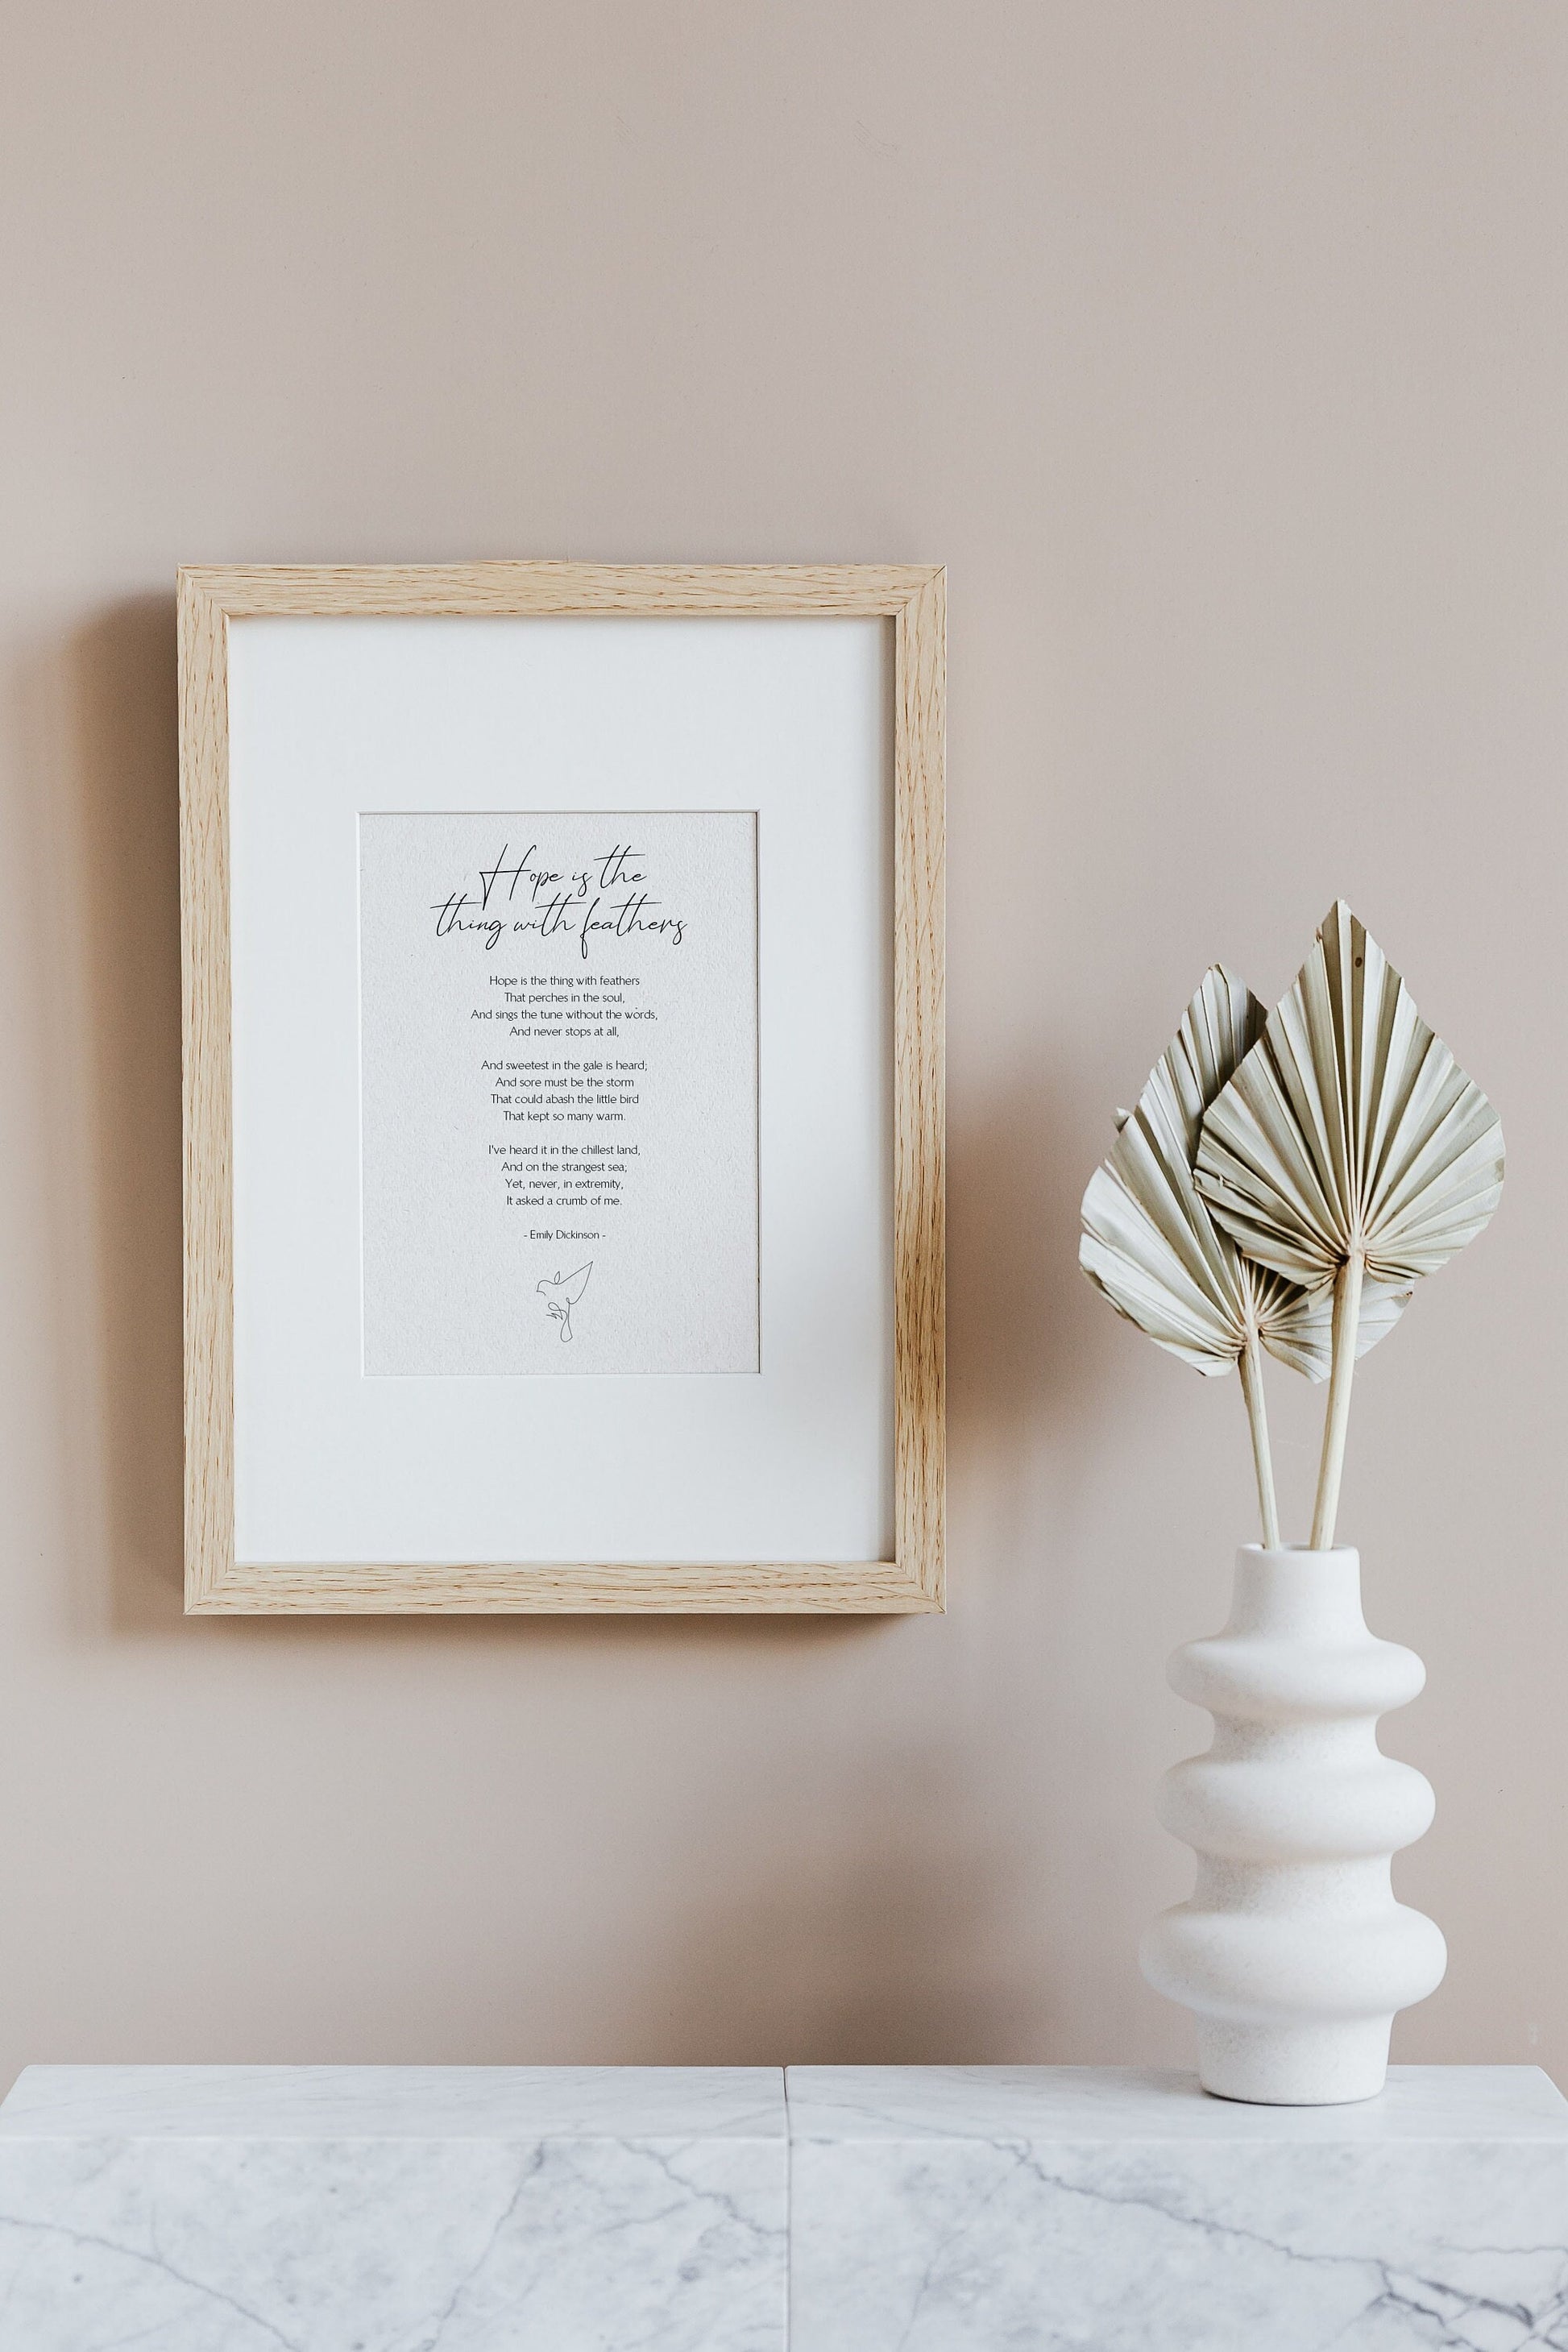 Hope is the thing with feather Print, Framed Poem by Emily Dickinson, Hope Poster, Wall decor, living room artwork